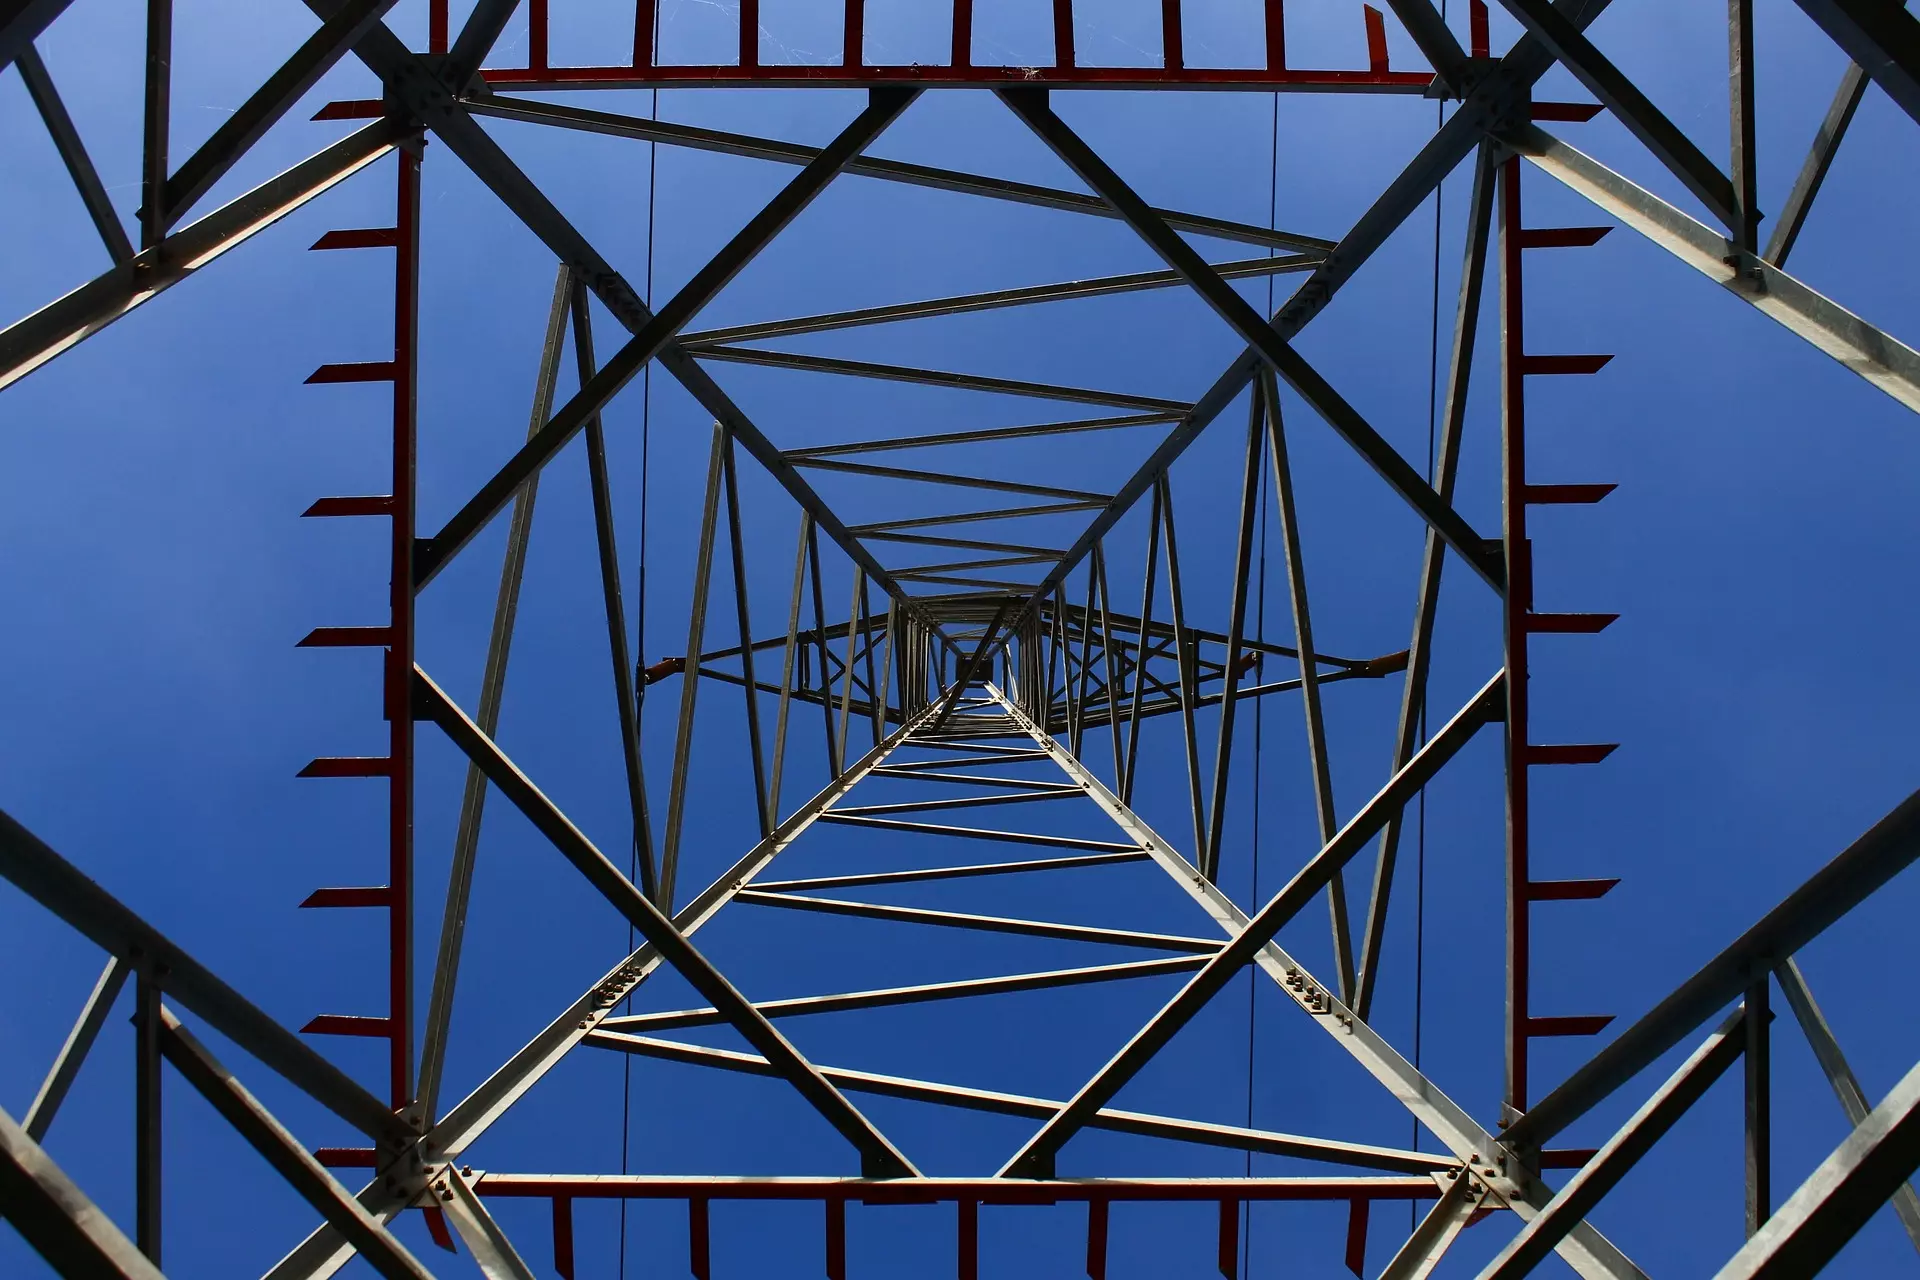 Electricity pylon viewed from below